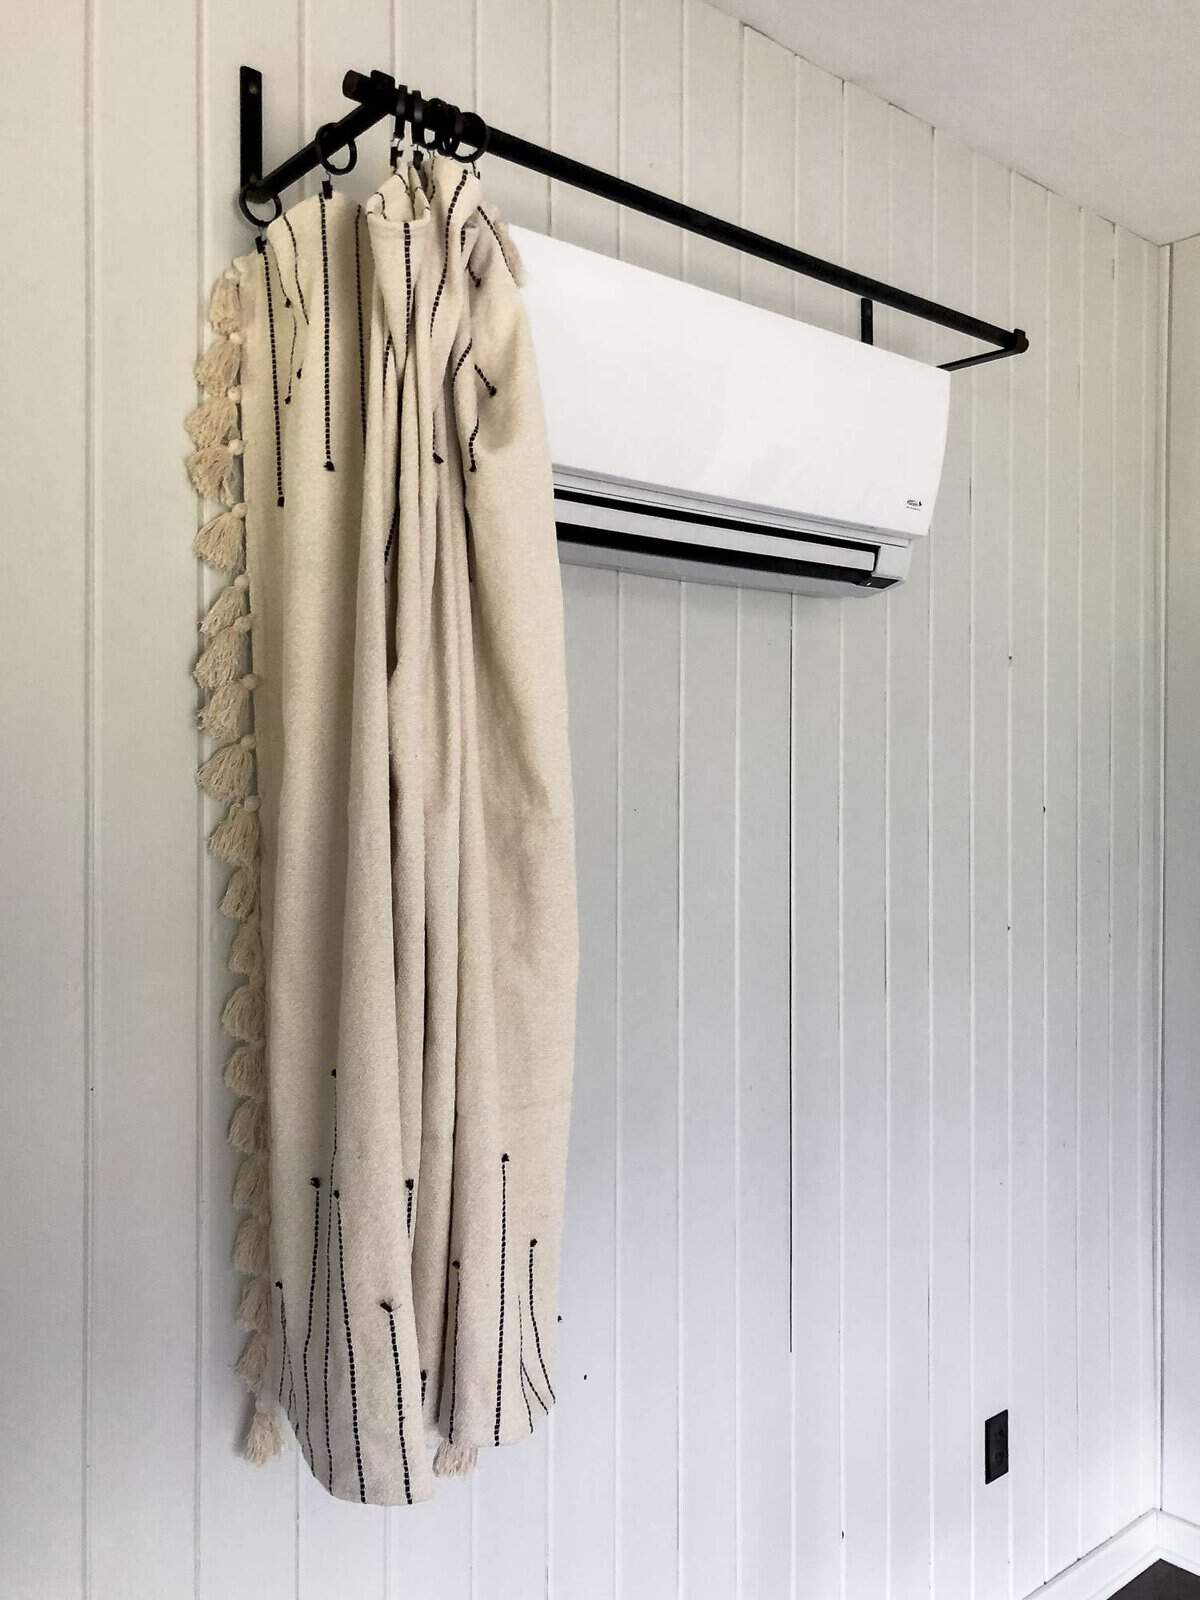 How to hide a wall heater with a blanket.